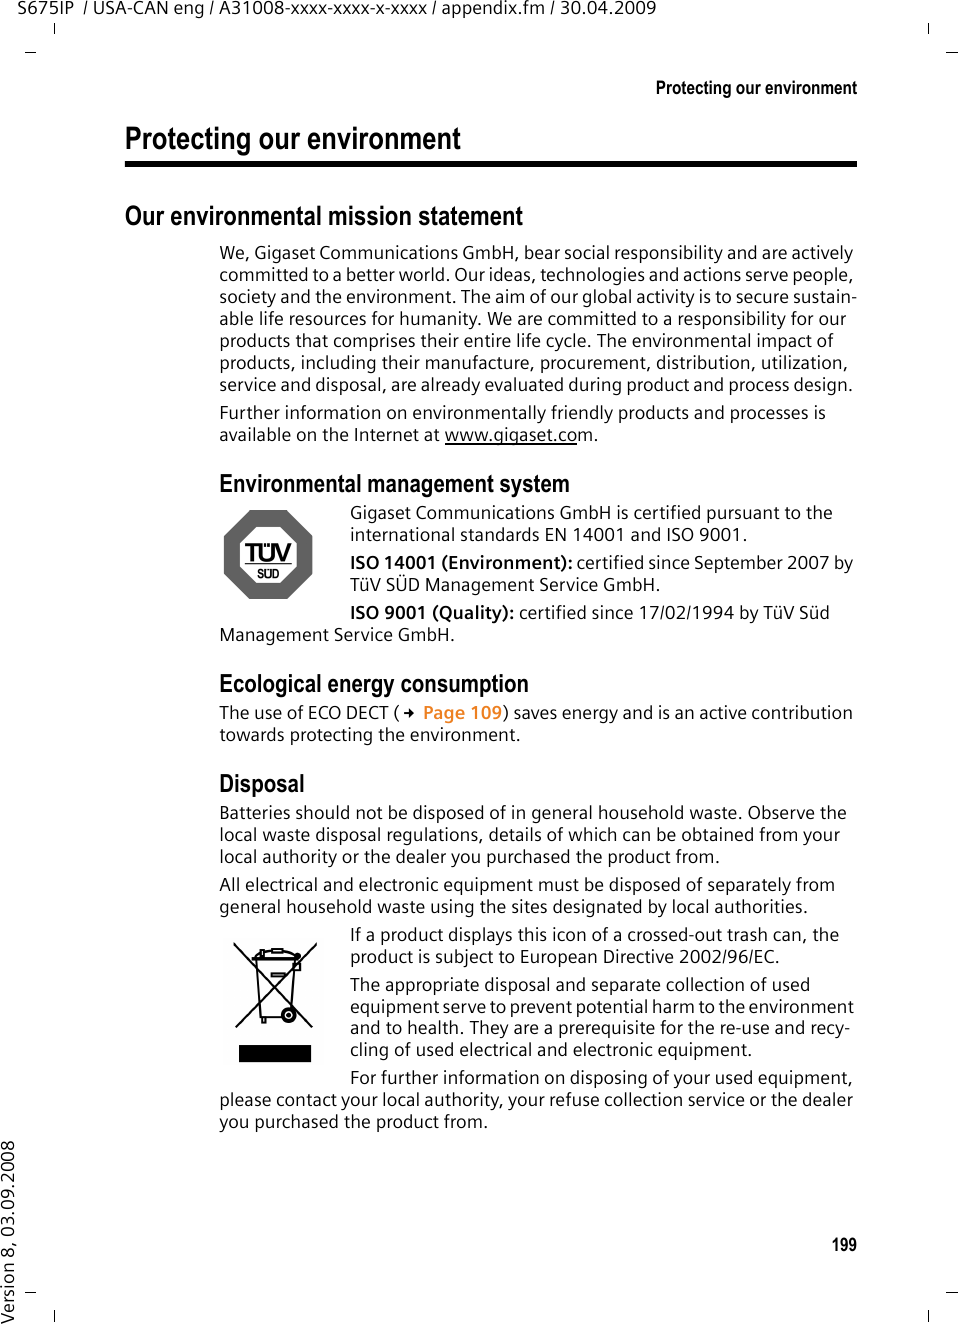 199Protecting our environmentS675IP  / USA-CAN eng / A31008-xxxx-xxxx-x-xxxx / appendix.fm / 30.04.2009Version 8, 03.09.2008Protecting our environmentOur environmental mission statement We, Gigaset Communications GmbH, bear social responsibility and are actively committed to a better world. Our ideas, technologies and actions serve people, society and the environment. The aim of our global activity is to secure sustain-able life resources for humanity. We are committed to a responsibility for our products that comprises their entire life cycle. The environmental impact of products, including their manufacture, procurement, distribution, utilization, service and disposal, are already evaluated during product and process design. Further information on environmentally friendly products and processes is available on the Internet at www.gigaset.com.Environmental management systemGigaset Communications GmbH is certified pursuant to the international standards EN 14001 and ISO 9001.ISO 14001 (Environment): certified since September 2007 by TüV SÜD Management Service GmbH.ISO 9001 (Quality): certified since 17/02/1994 by TüV Süd Management Service GmbH.Ecological energy consumptionThe use of ECO DECT (£Page 109) saves energy and is an active contribution towards protecting the environment. DisposalBatteries should not be disposed of in general household waste. Observe the local waste disposal regulations, details of which can be obtained from your local authority or the dealer you purchased the product from.All electrical and electronic equipment must be disposed of separately from general household waste using the sites designated by local authorities.If a product displays this icon of a crossed-out trash can, the product is subject to European Directive 2002/96/EC.The appropriate disposal and separate collection of used equipment serve to prevent potential harm to the environment and to health. They are a prerequisite for the re-use and recy-cling of used electrical and electronic equipment.For further information on disposing of your used equipment, please contact your local authority, your refuse collection service or the dealer you purchased the product from.